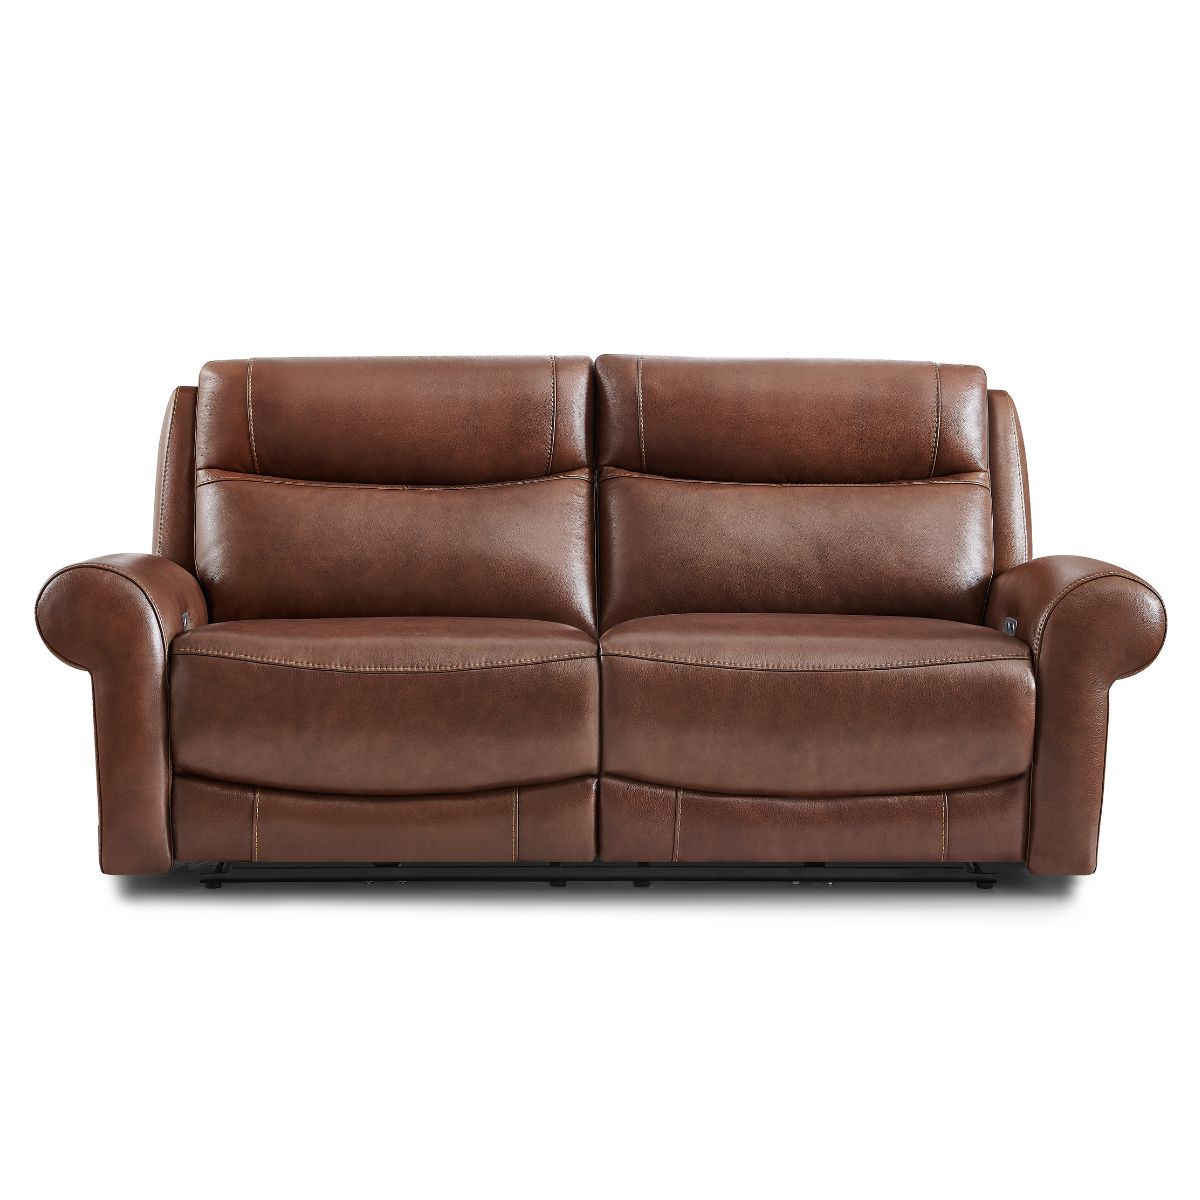 Lindfield Tan Leather 3 Seater Powered Recliner - 1